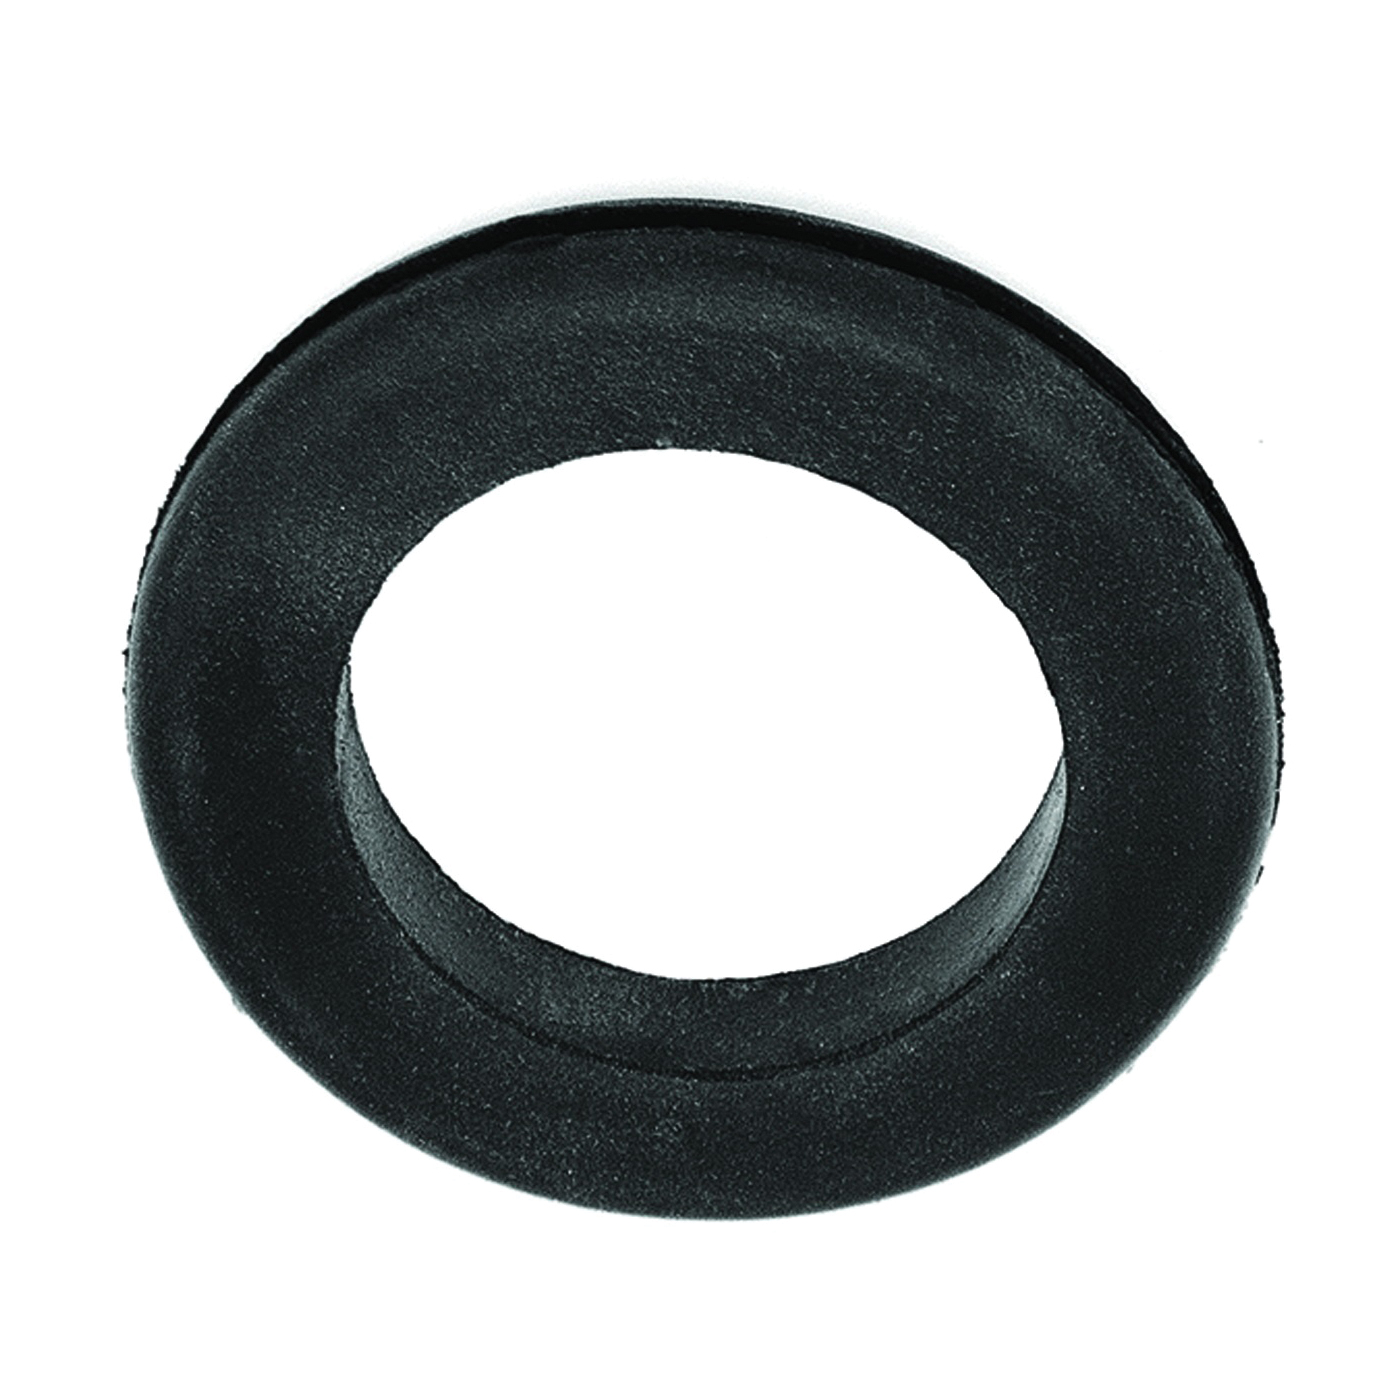 61489 Grommet, Rubber, Black, 3/8 in Thick Panel